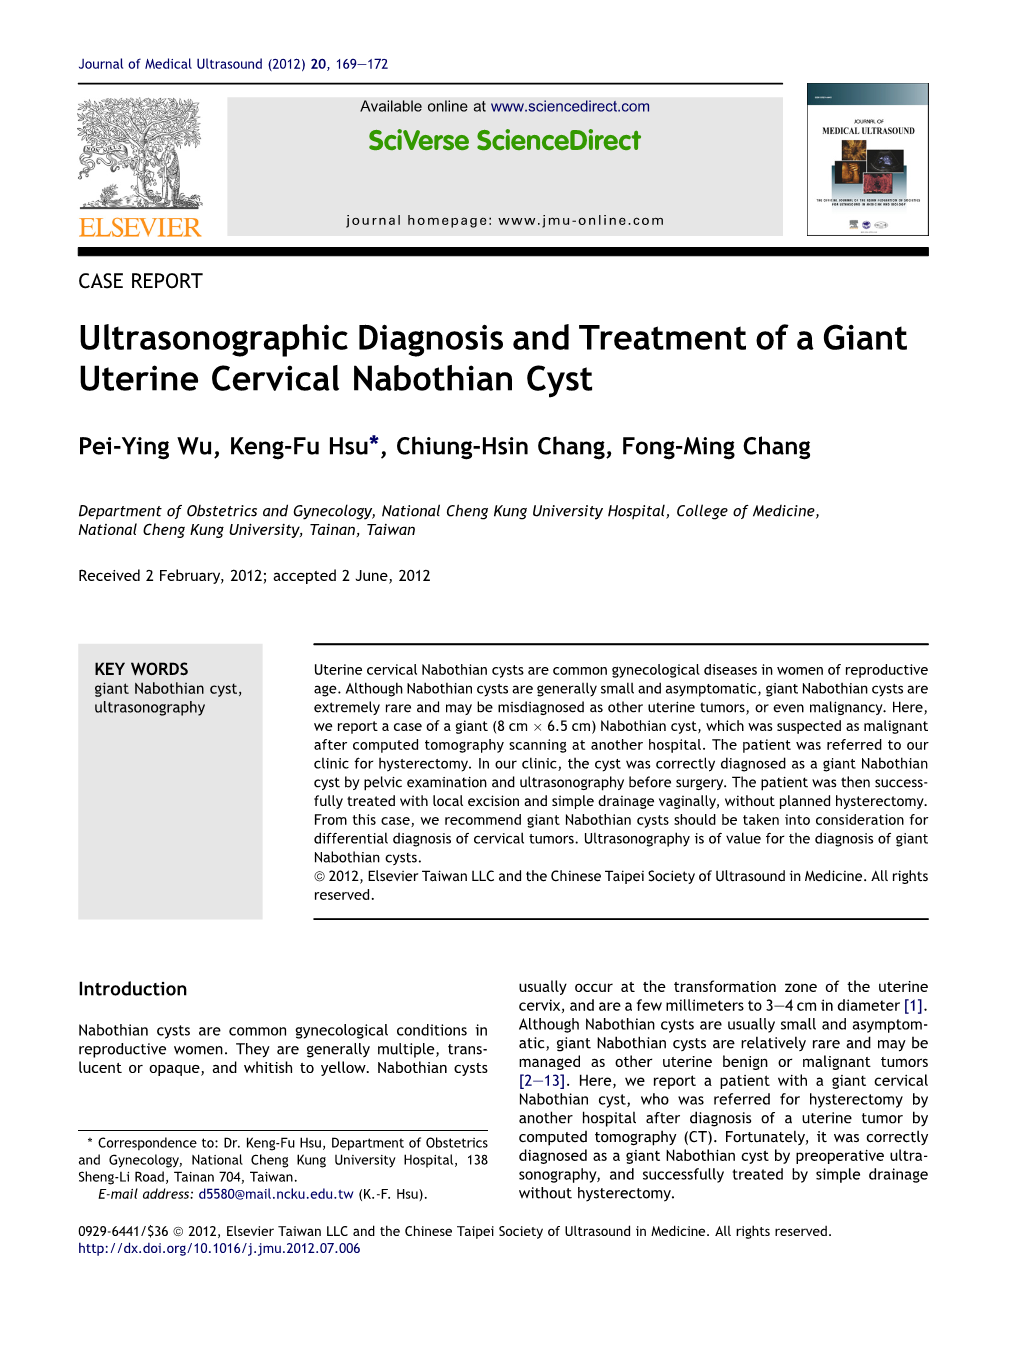 Ultrasonographic Diagnosis and Treatment of a Giant Uterine Cervical Nabothian Cyst